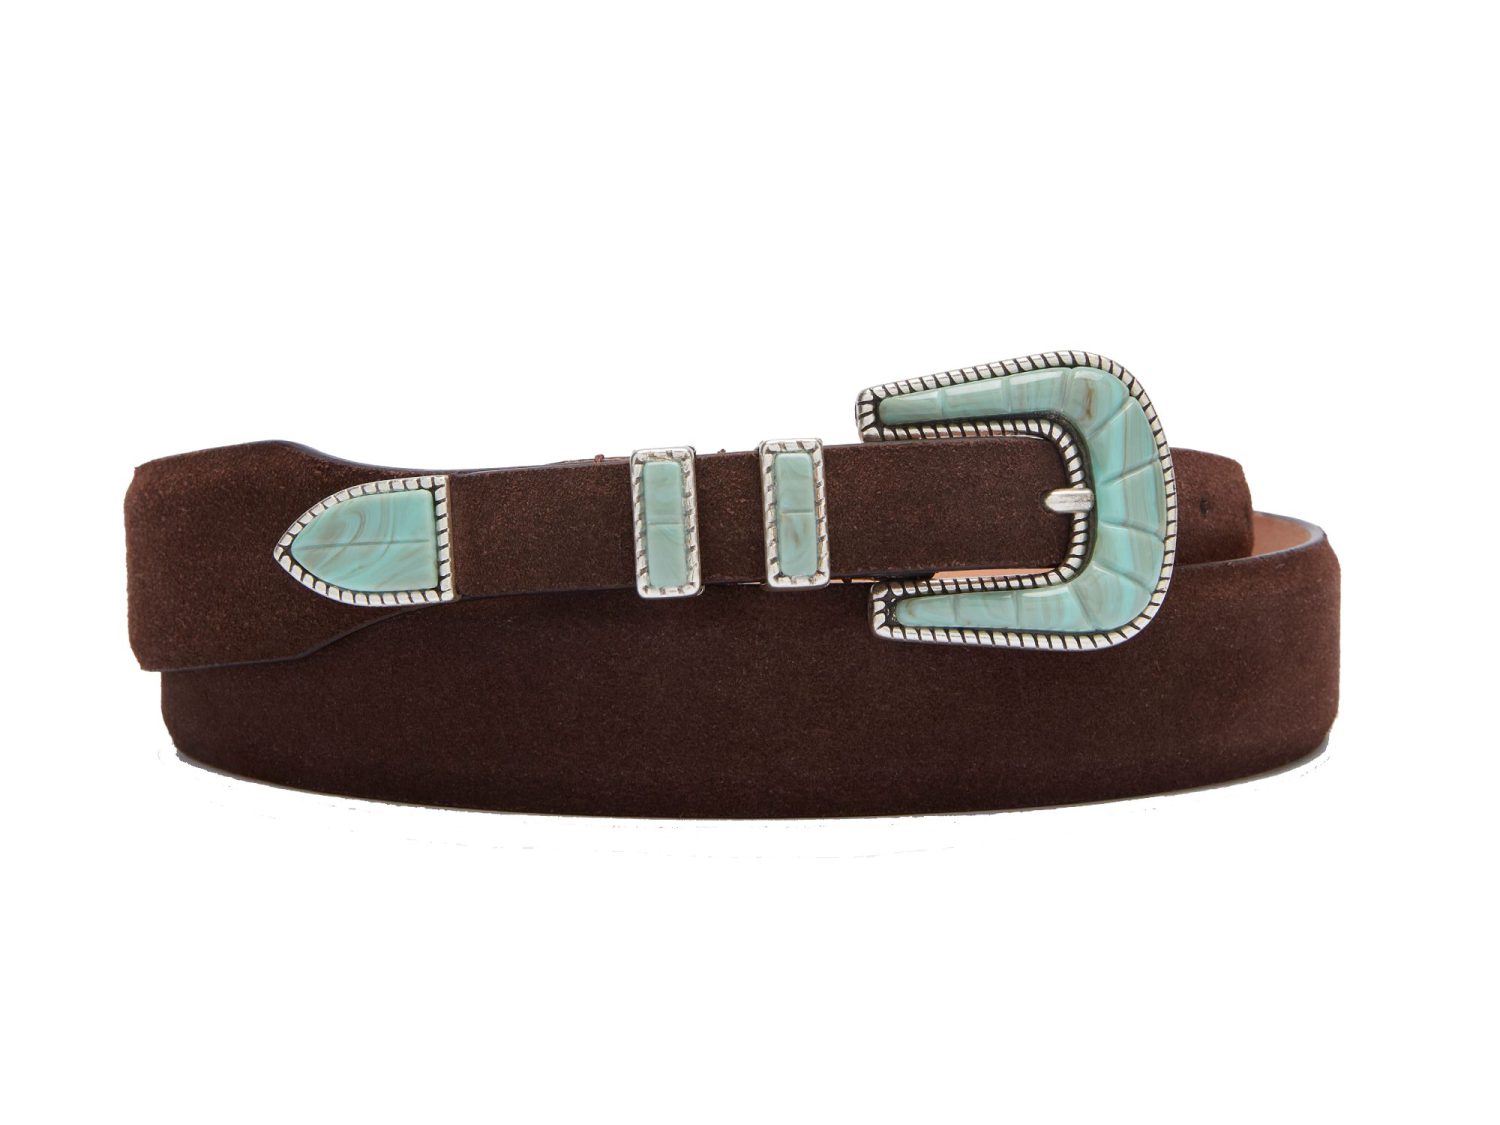 western crazy color belt with turquoise buckle , brown suede, rolled